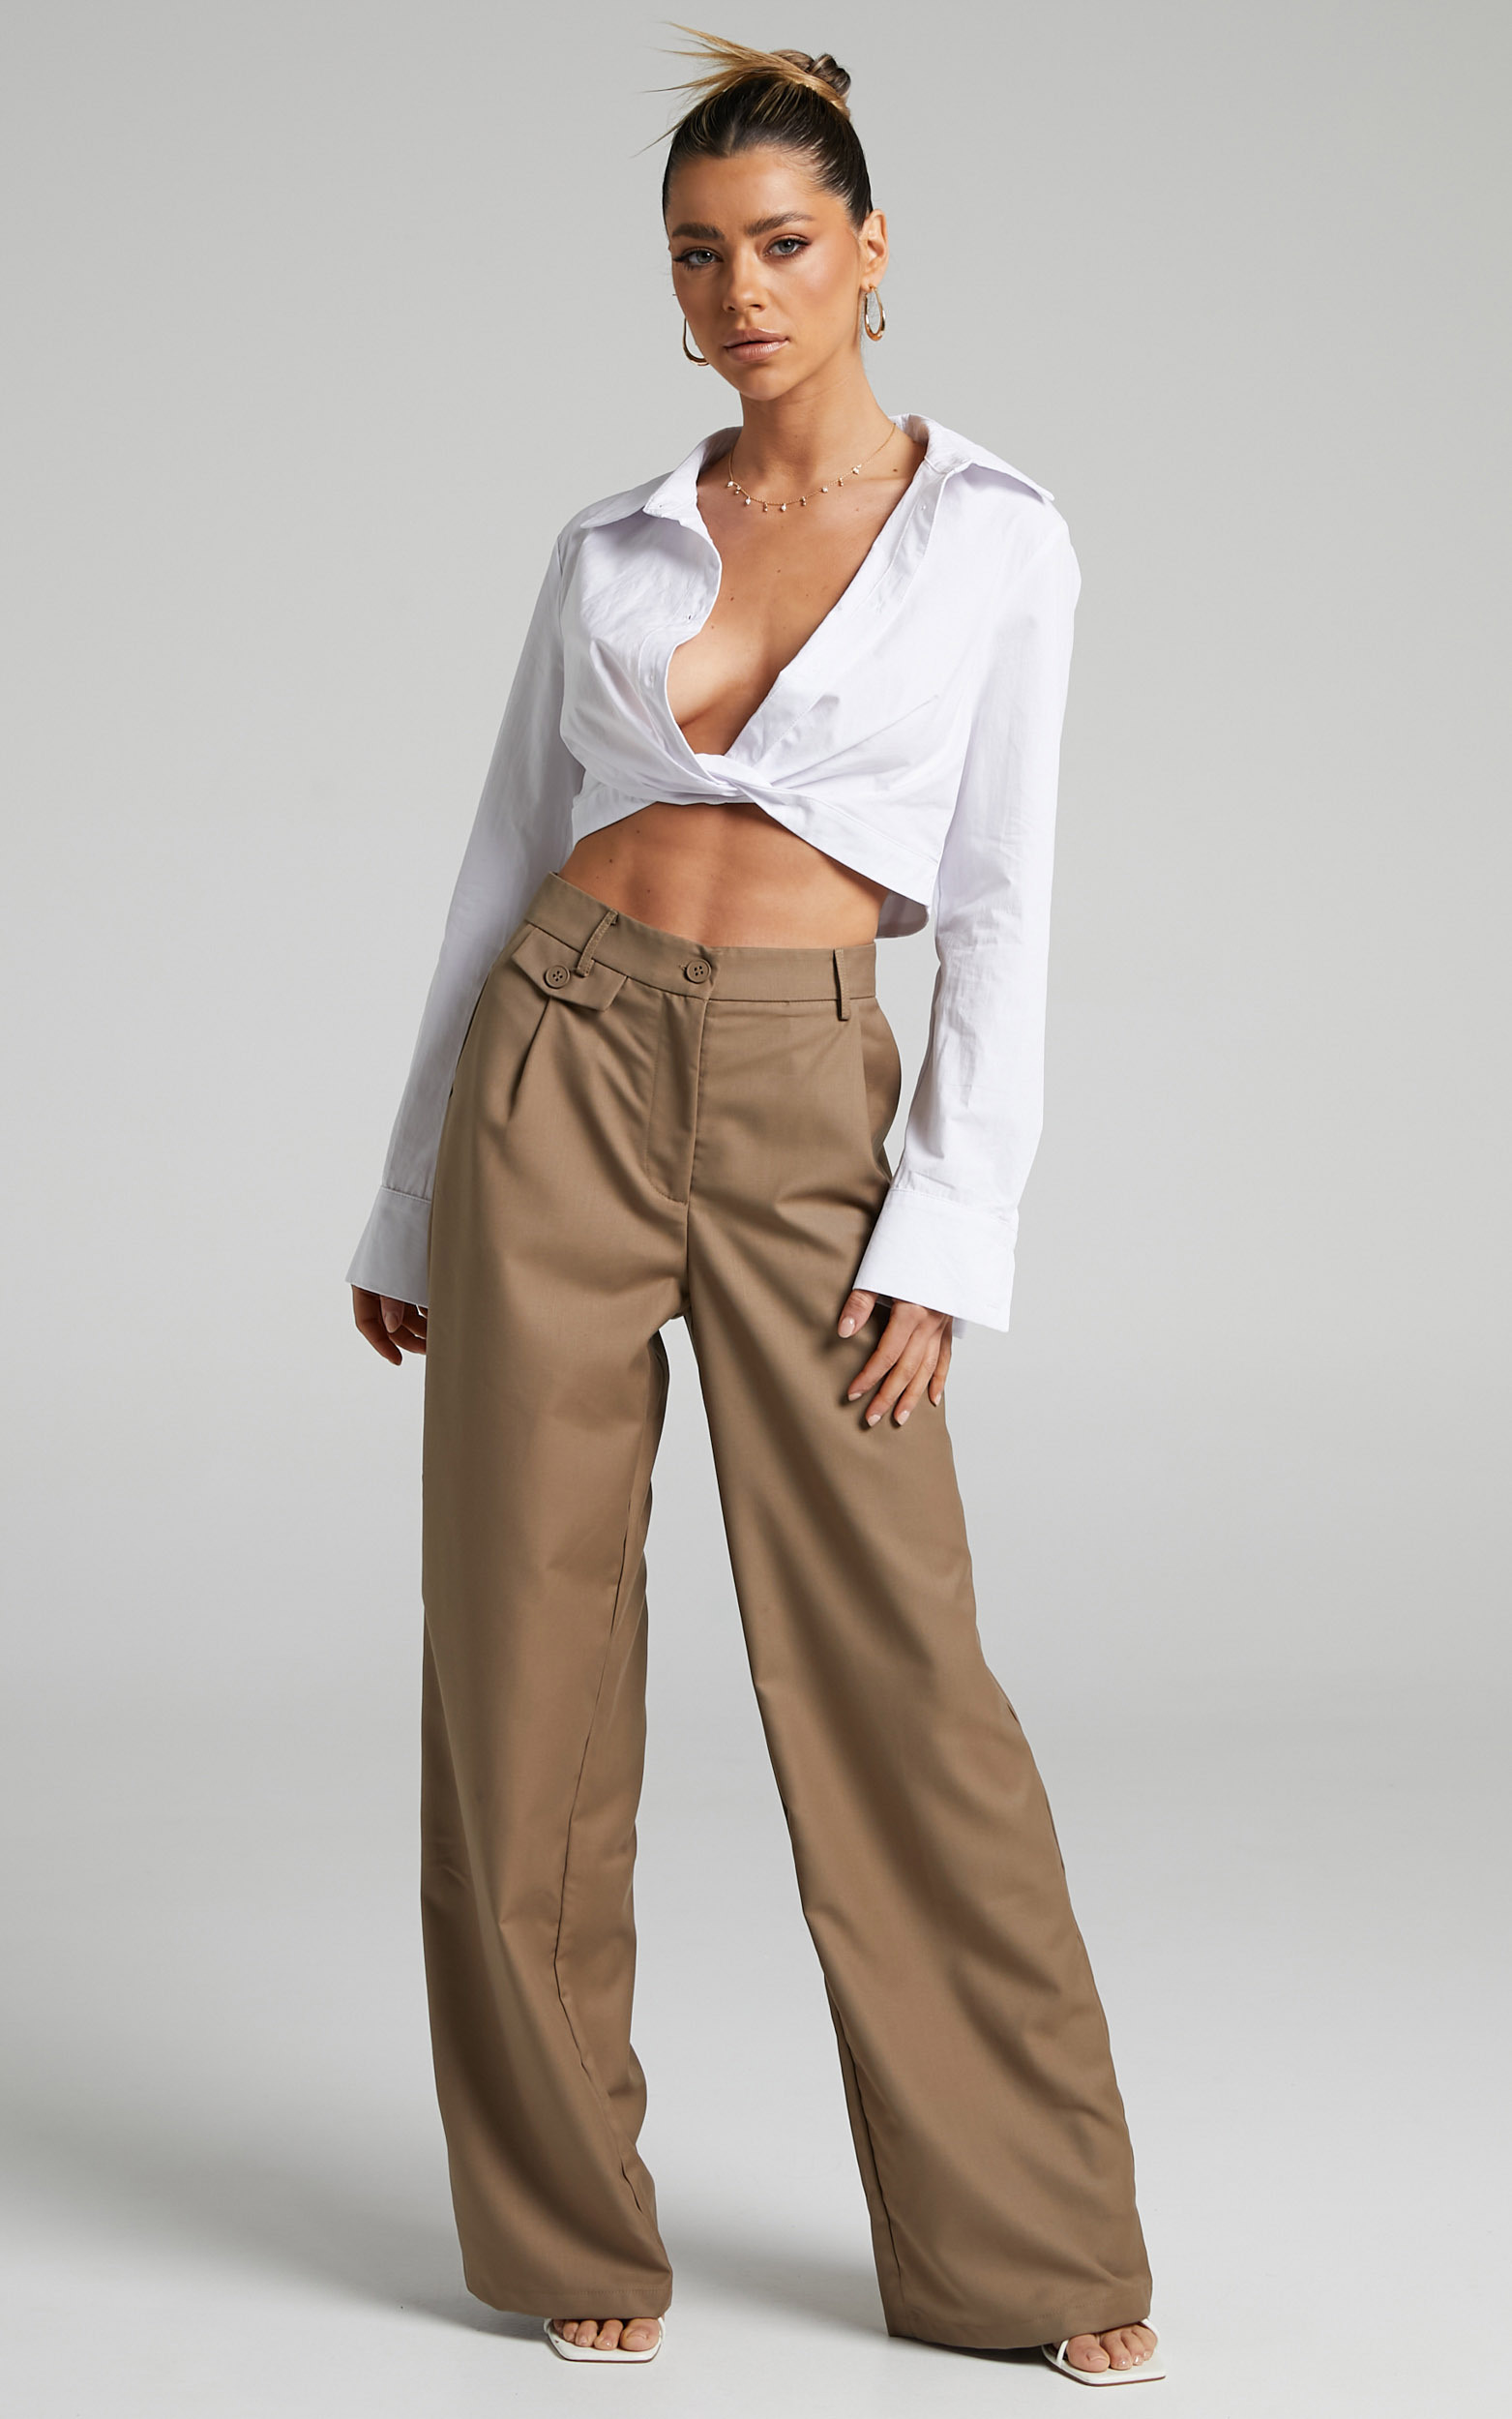 Romola Low Rise Relaxed Pocket Flap Detail Straight Leg Trousers in Mocha - 04, BRN1, hi-res image number null